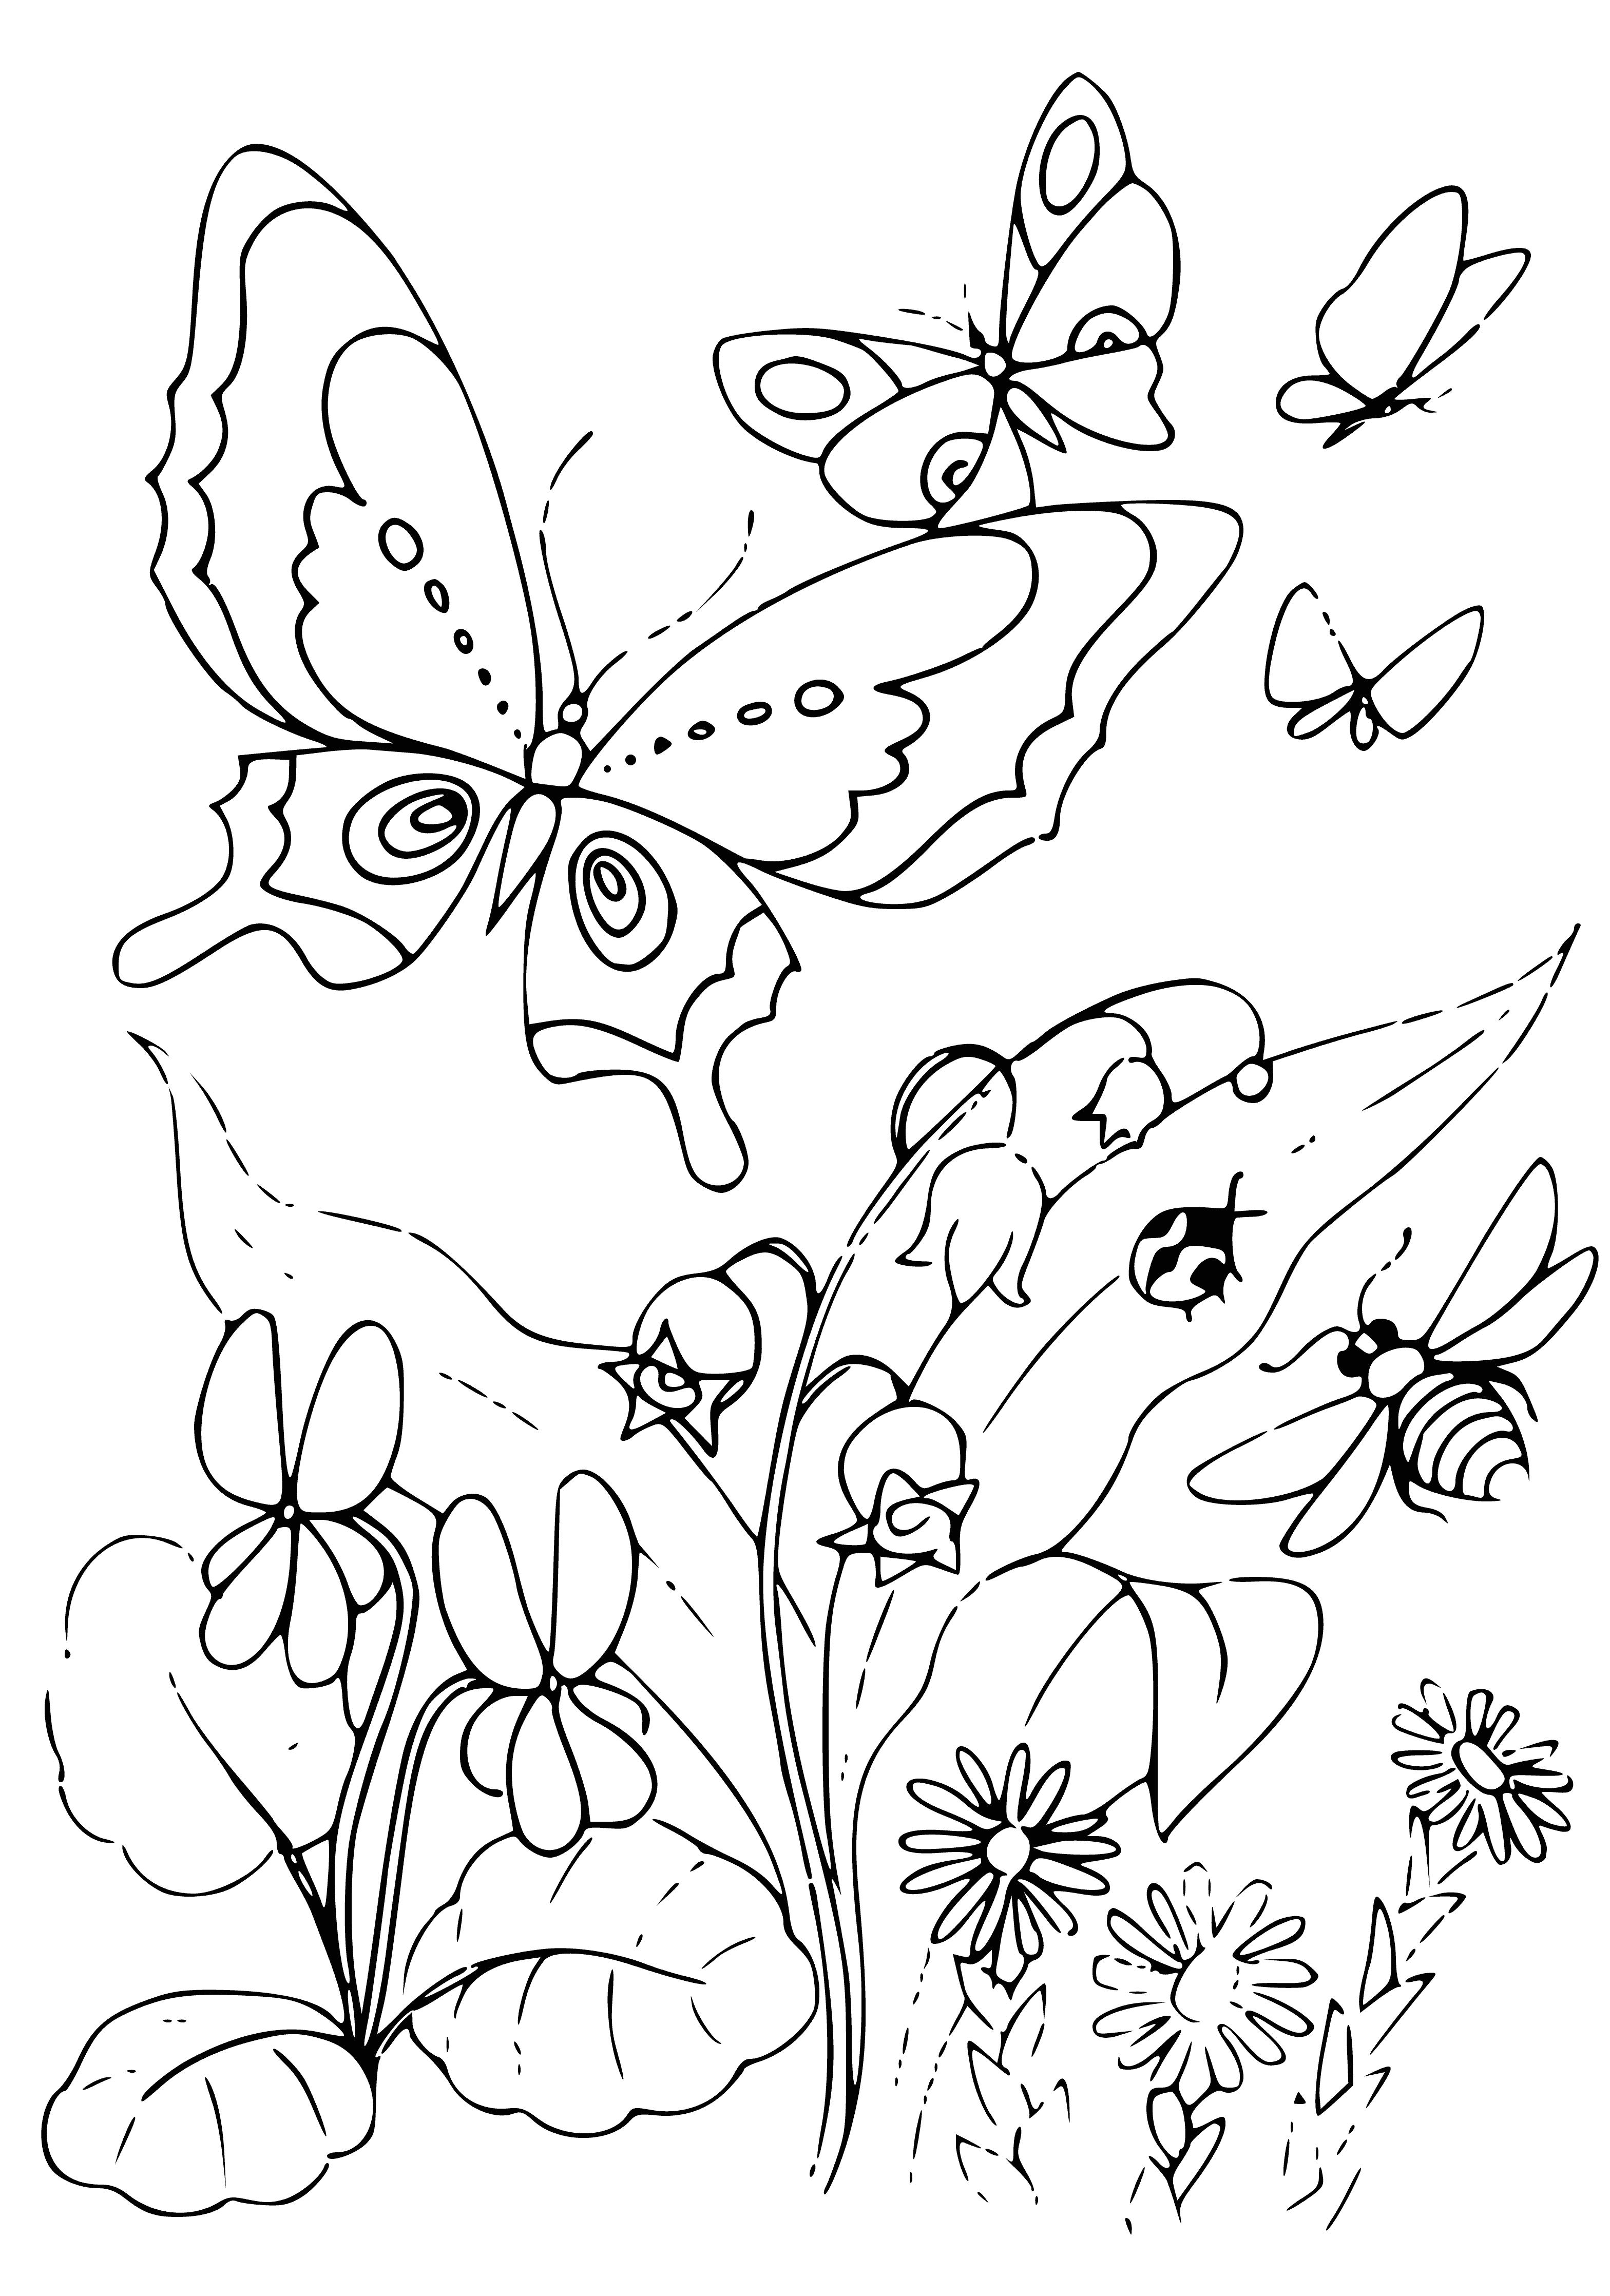 Lily of the valley flowers coloring page